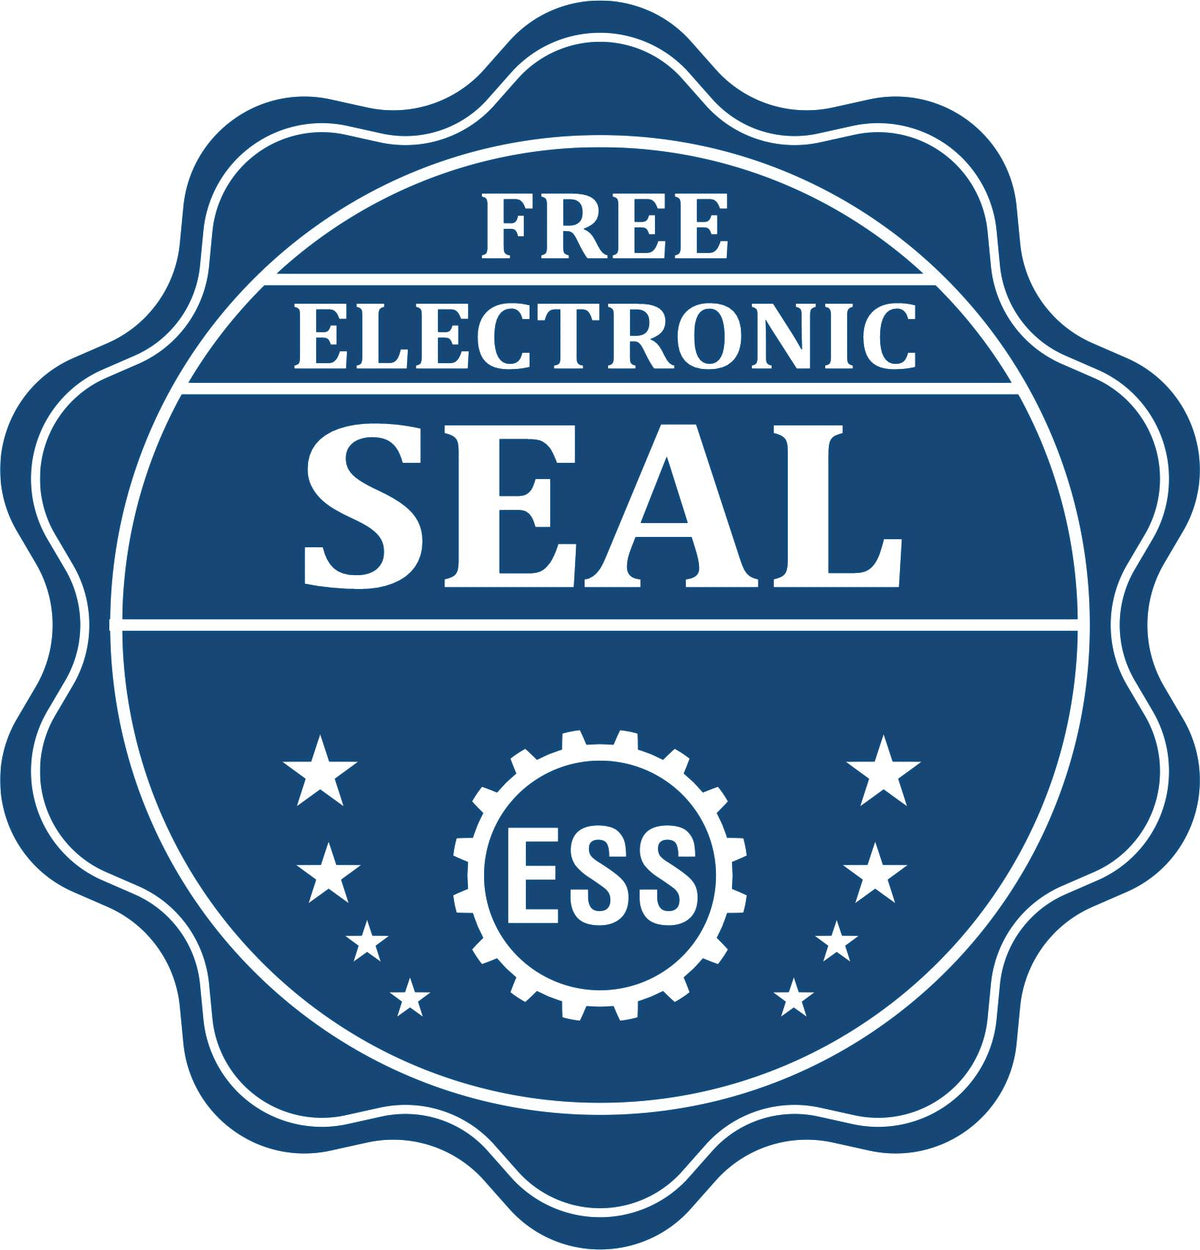 A badge showing a free electronic seal for the Pennsylvania Professional Engineer Seal Stamp with stars and the ESS gear on the emblem.